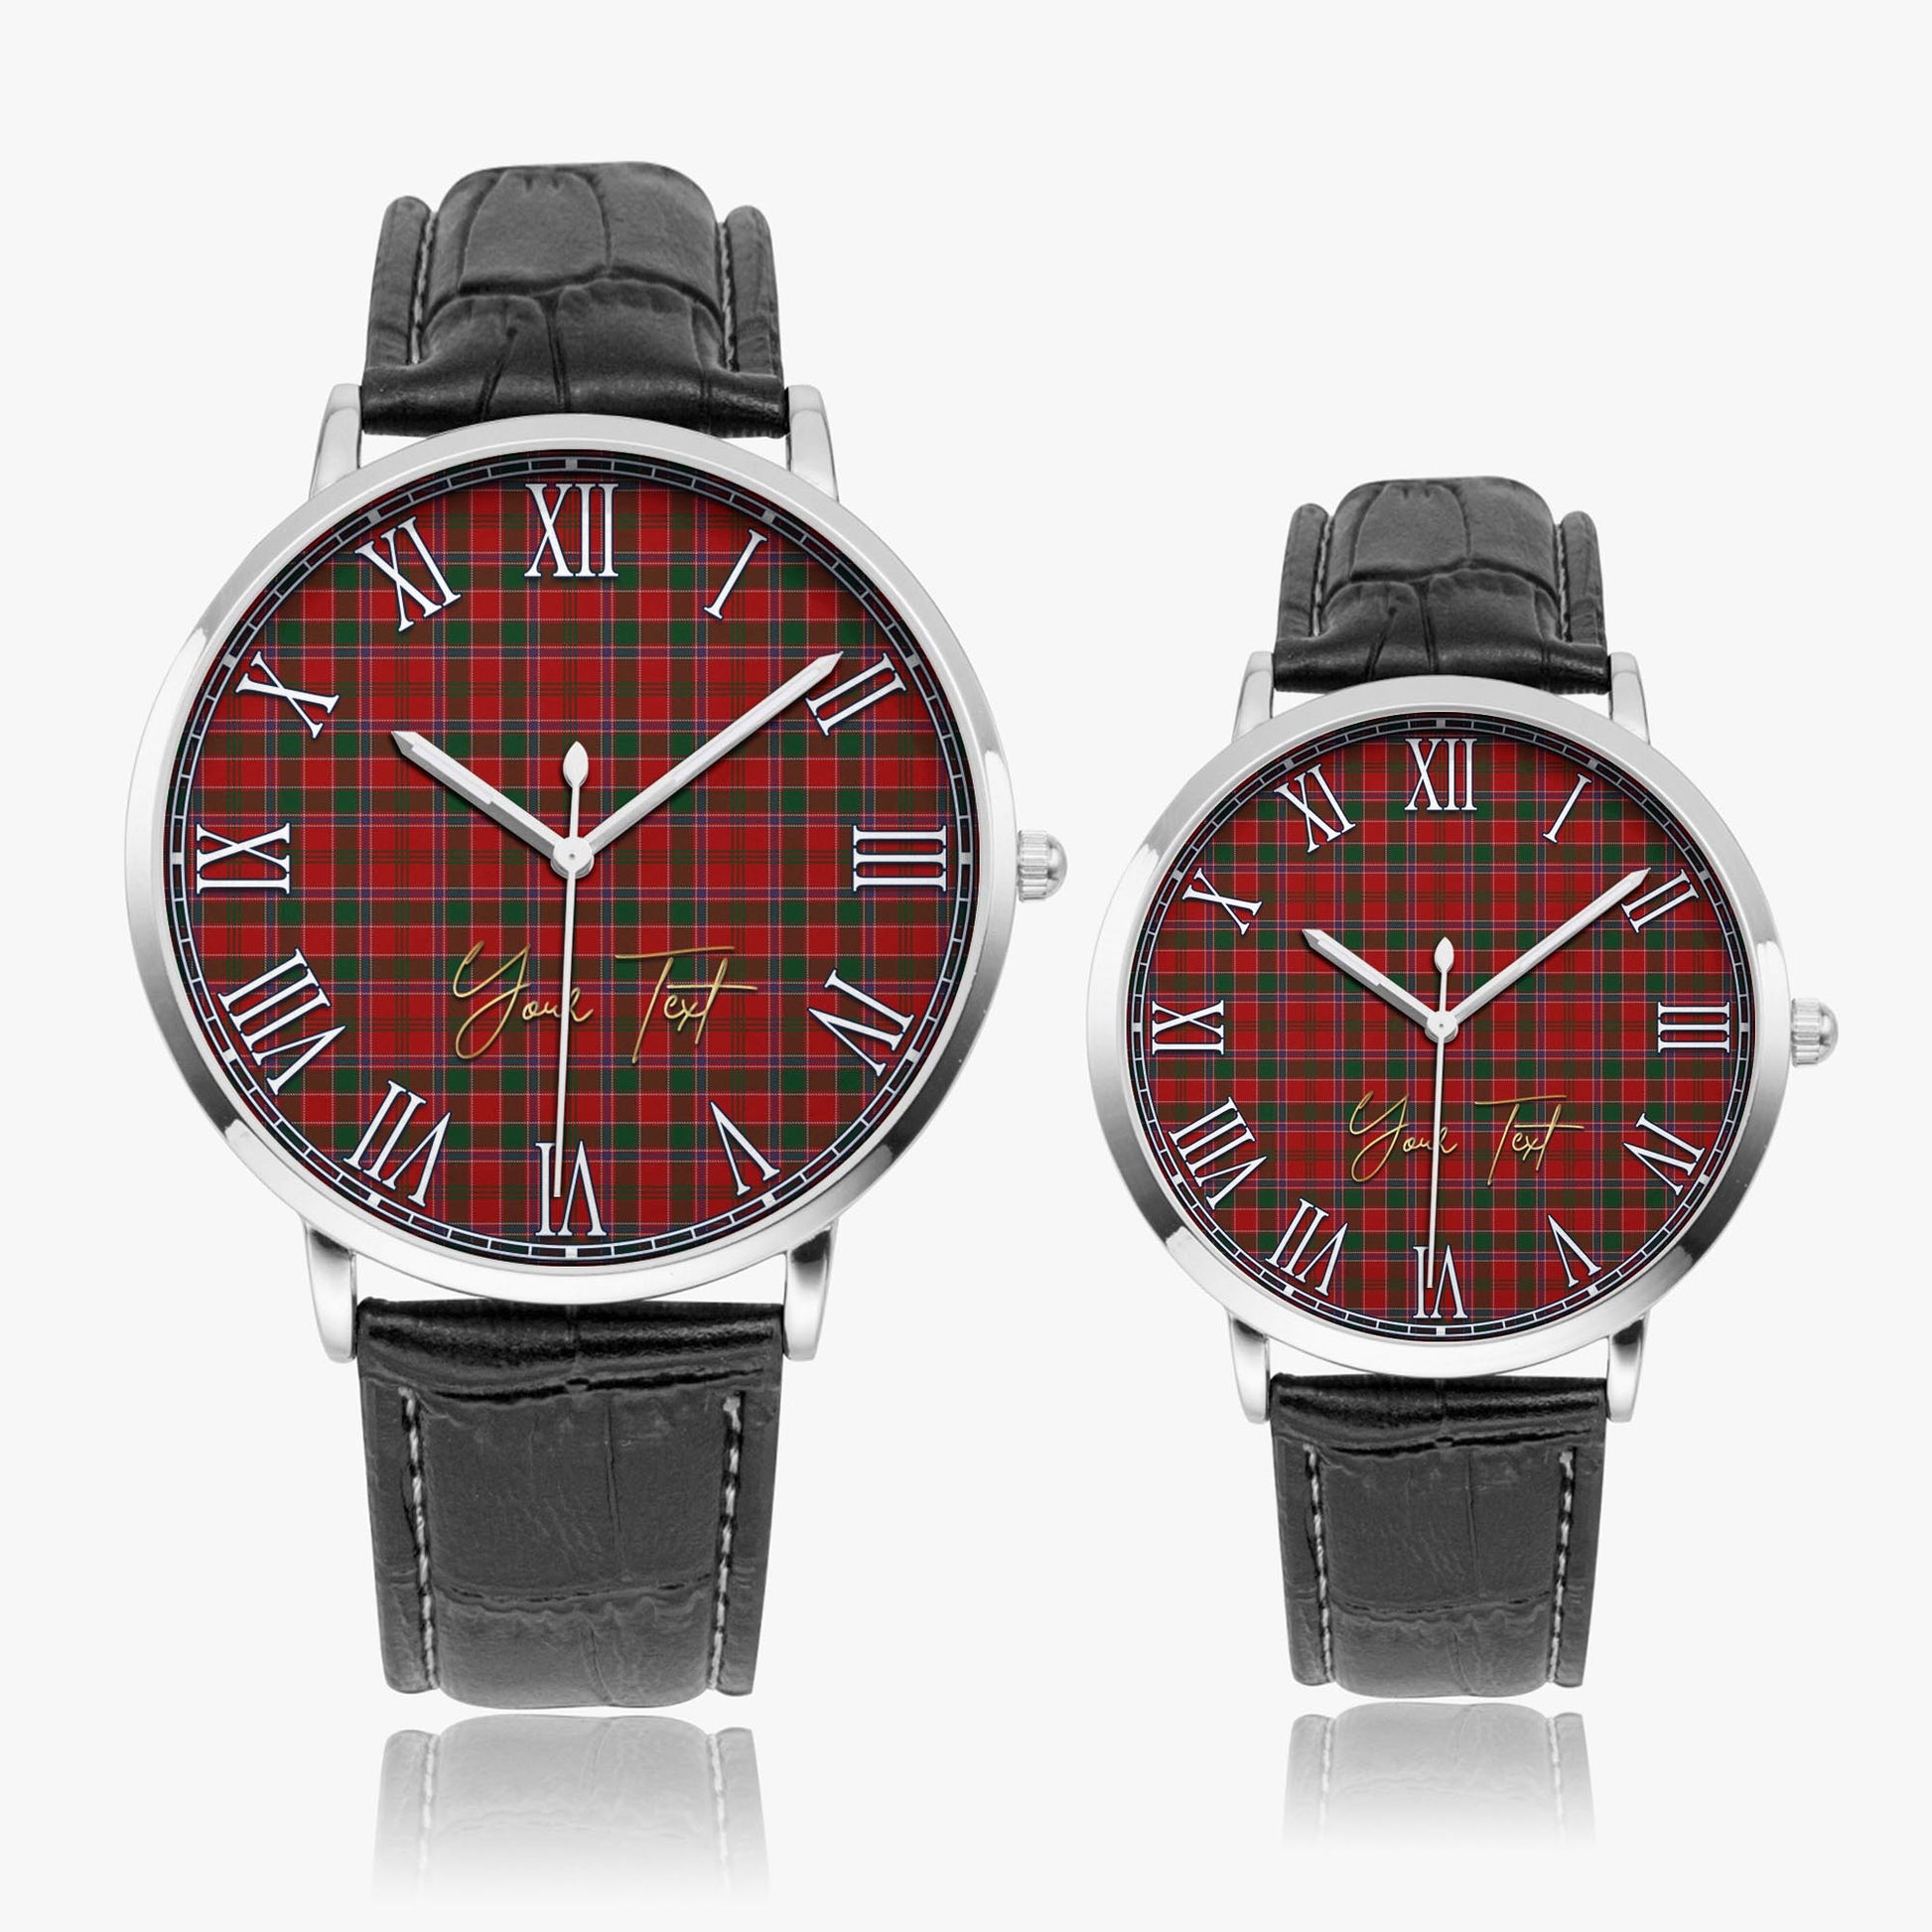 Dalzell (Dalziel) Tartan Personalized Your Text Leather Trap Quartz Watch Ultra Thin Silver Case With Black Leather Strap - Tartanvibesclothing